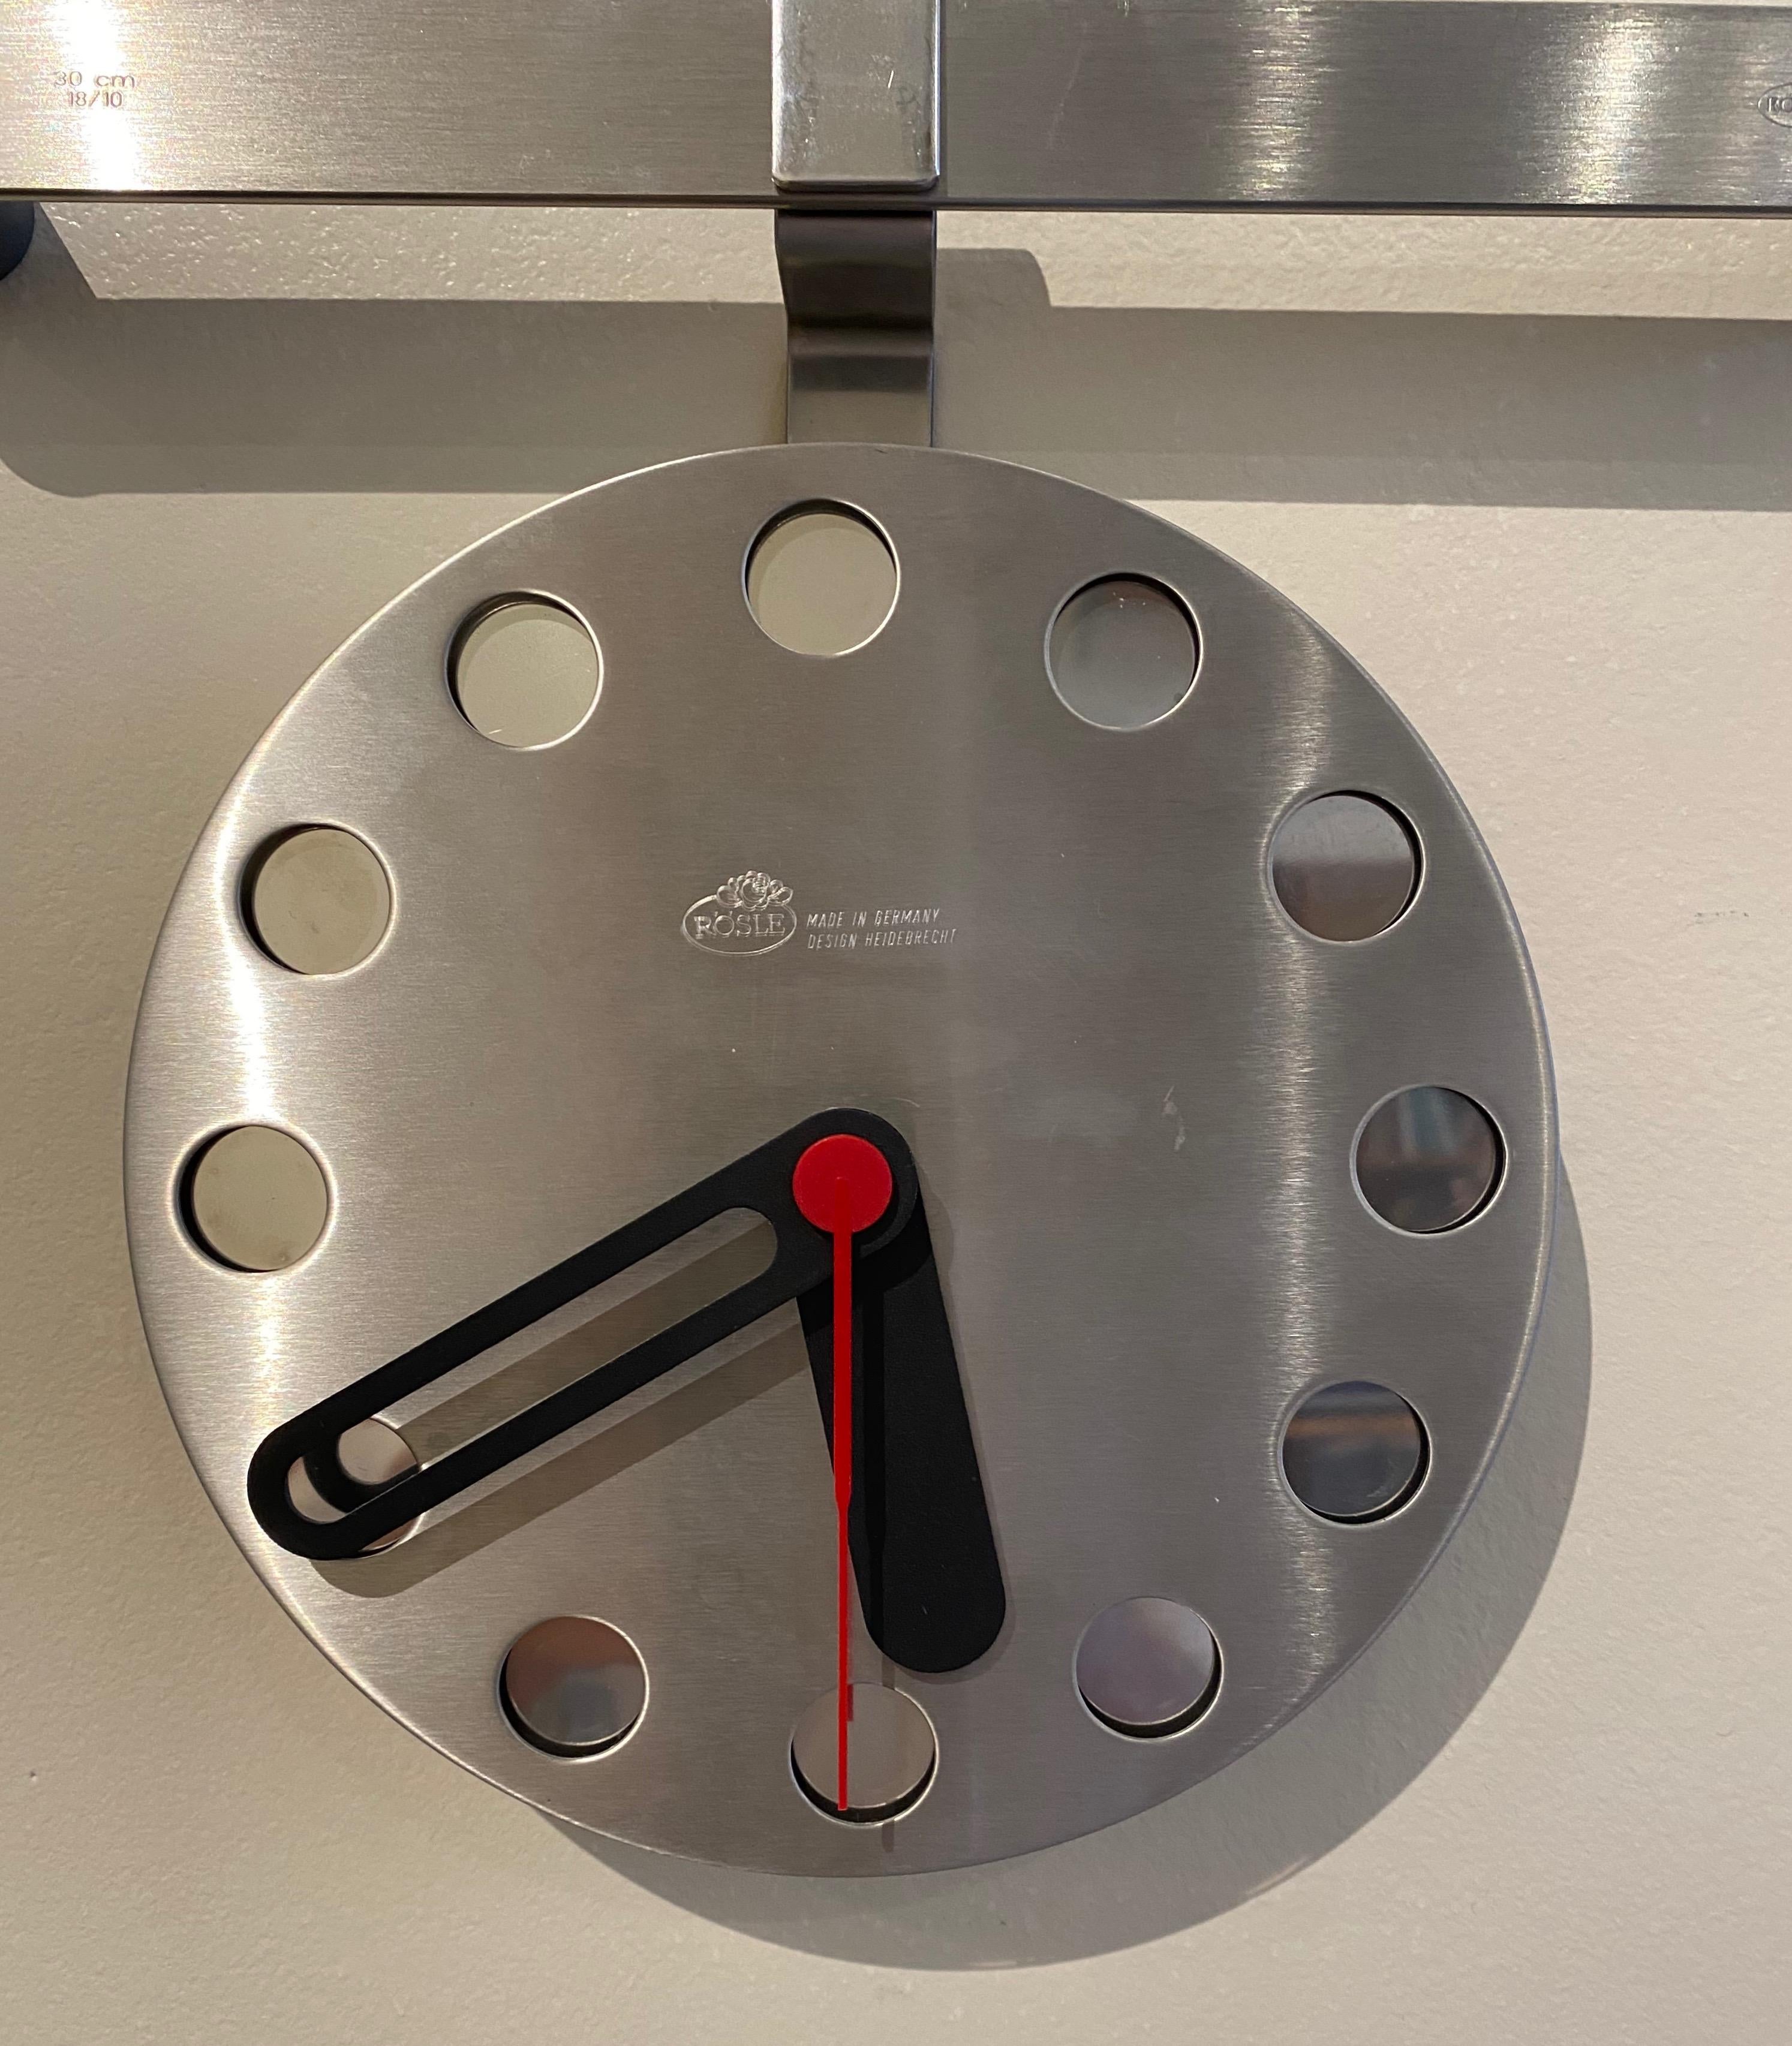 Stainless steel wall clock by Rosle Metallwarenfabrik of Germany, created by Heidebrecht Design. This design was part of the Rosle Kitchen rail system produced during the 1990s to early 2000s. A handsome modernist wall clock for the kitchen or other